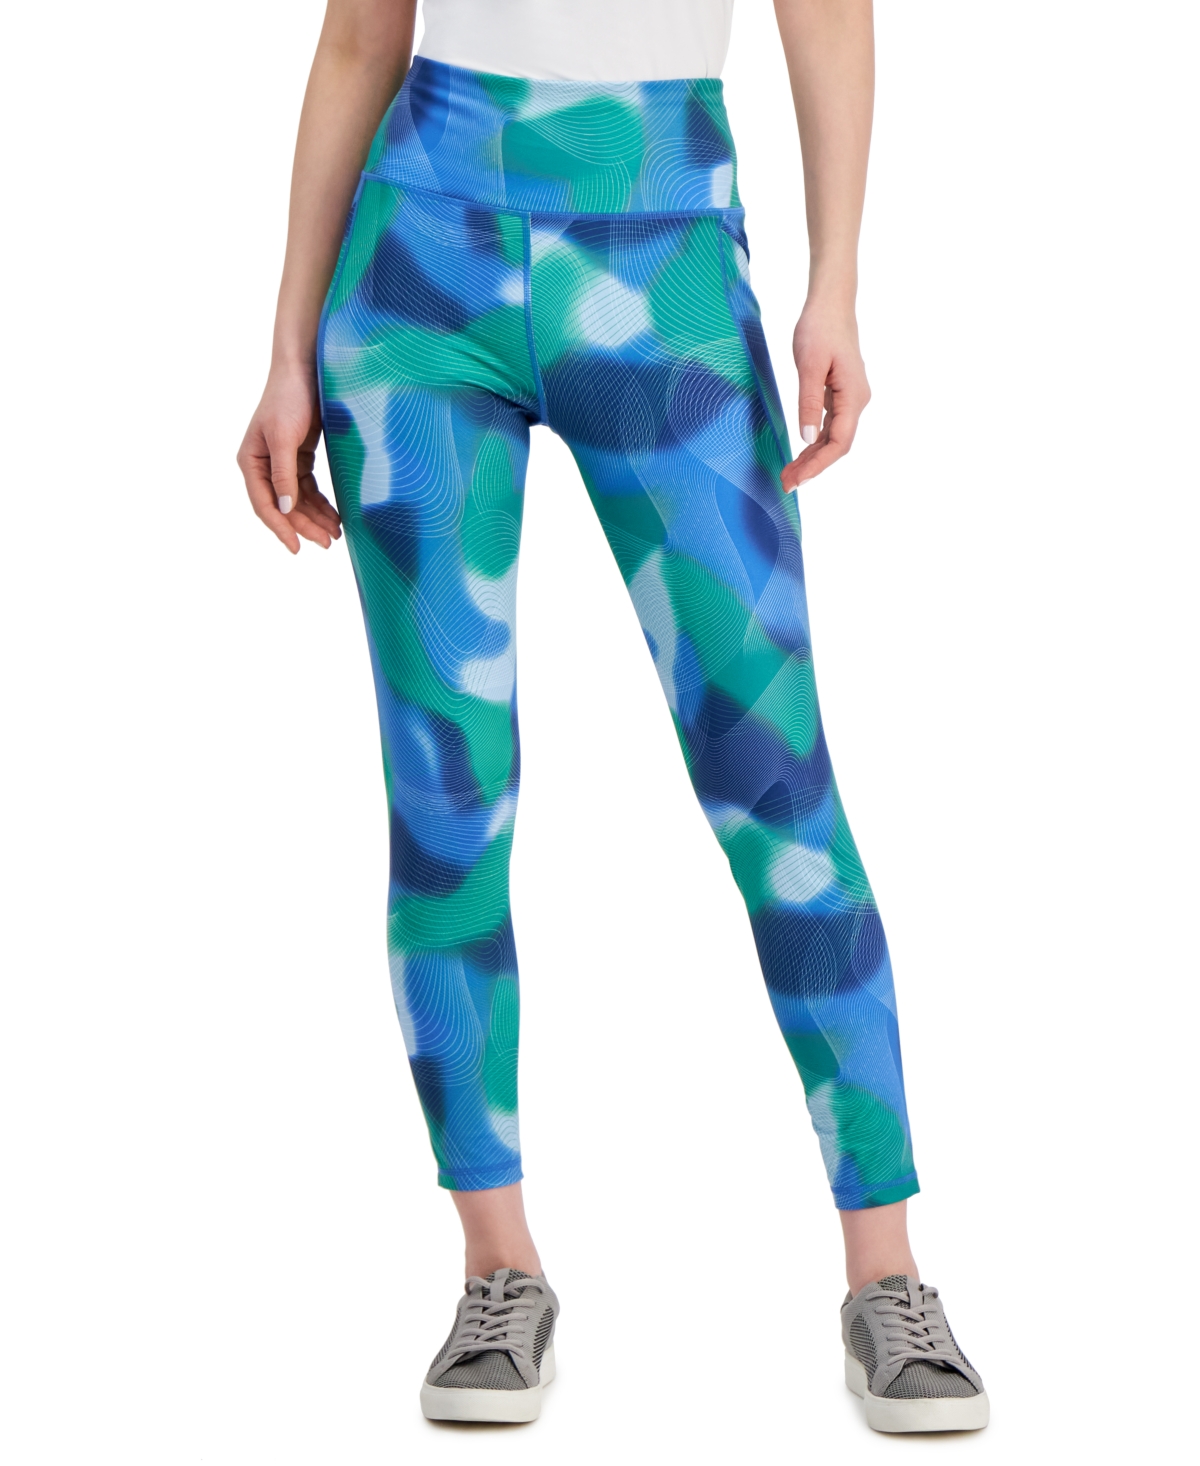 Women's Printed 7/8 Compression Leggings, Created for Macy's - Tartan Blue